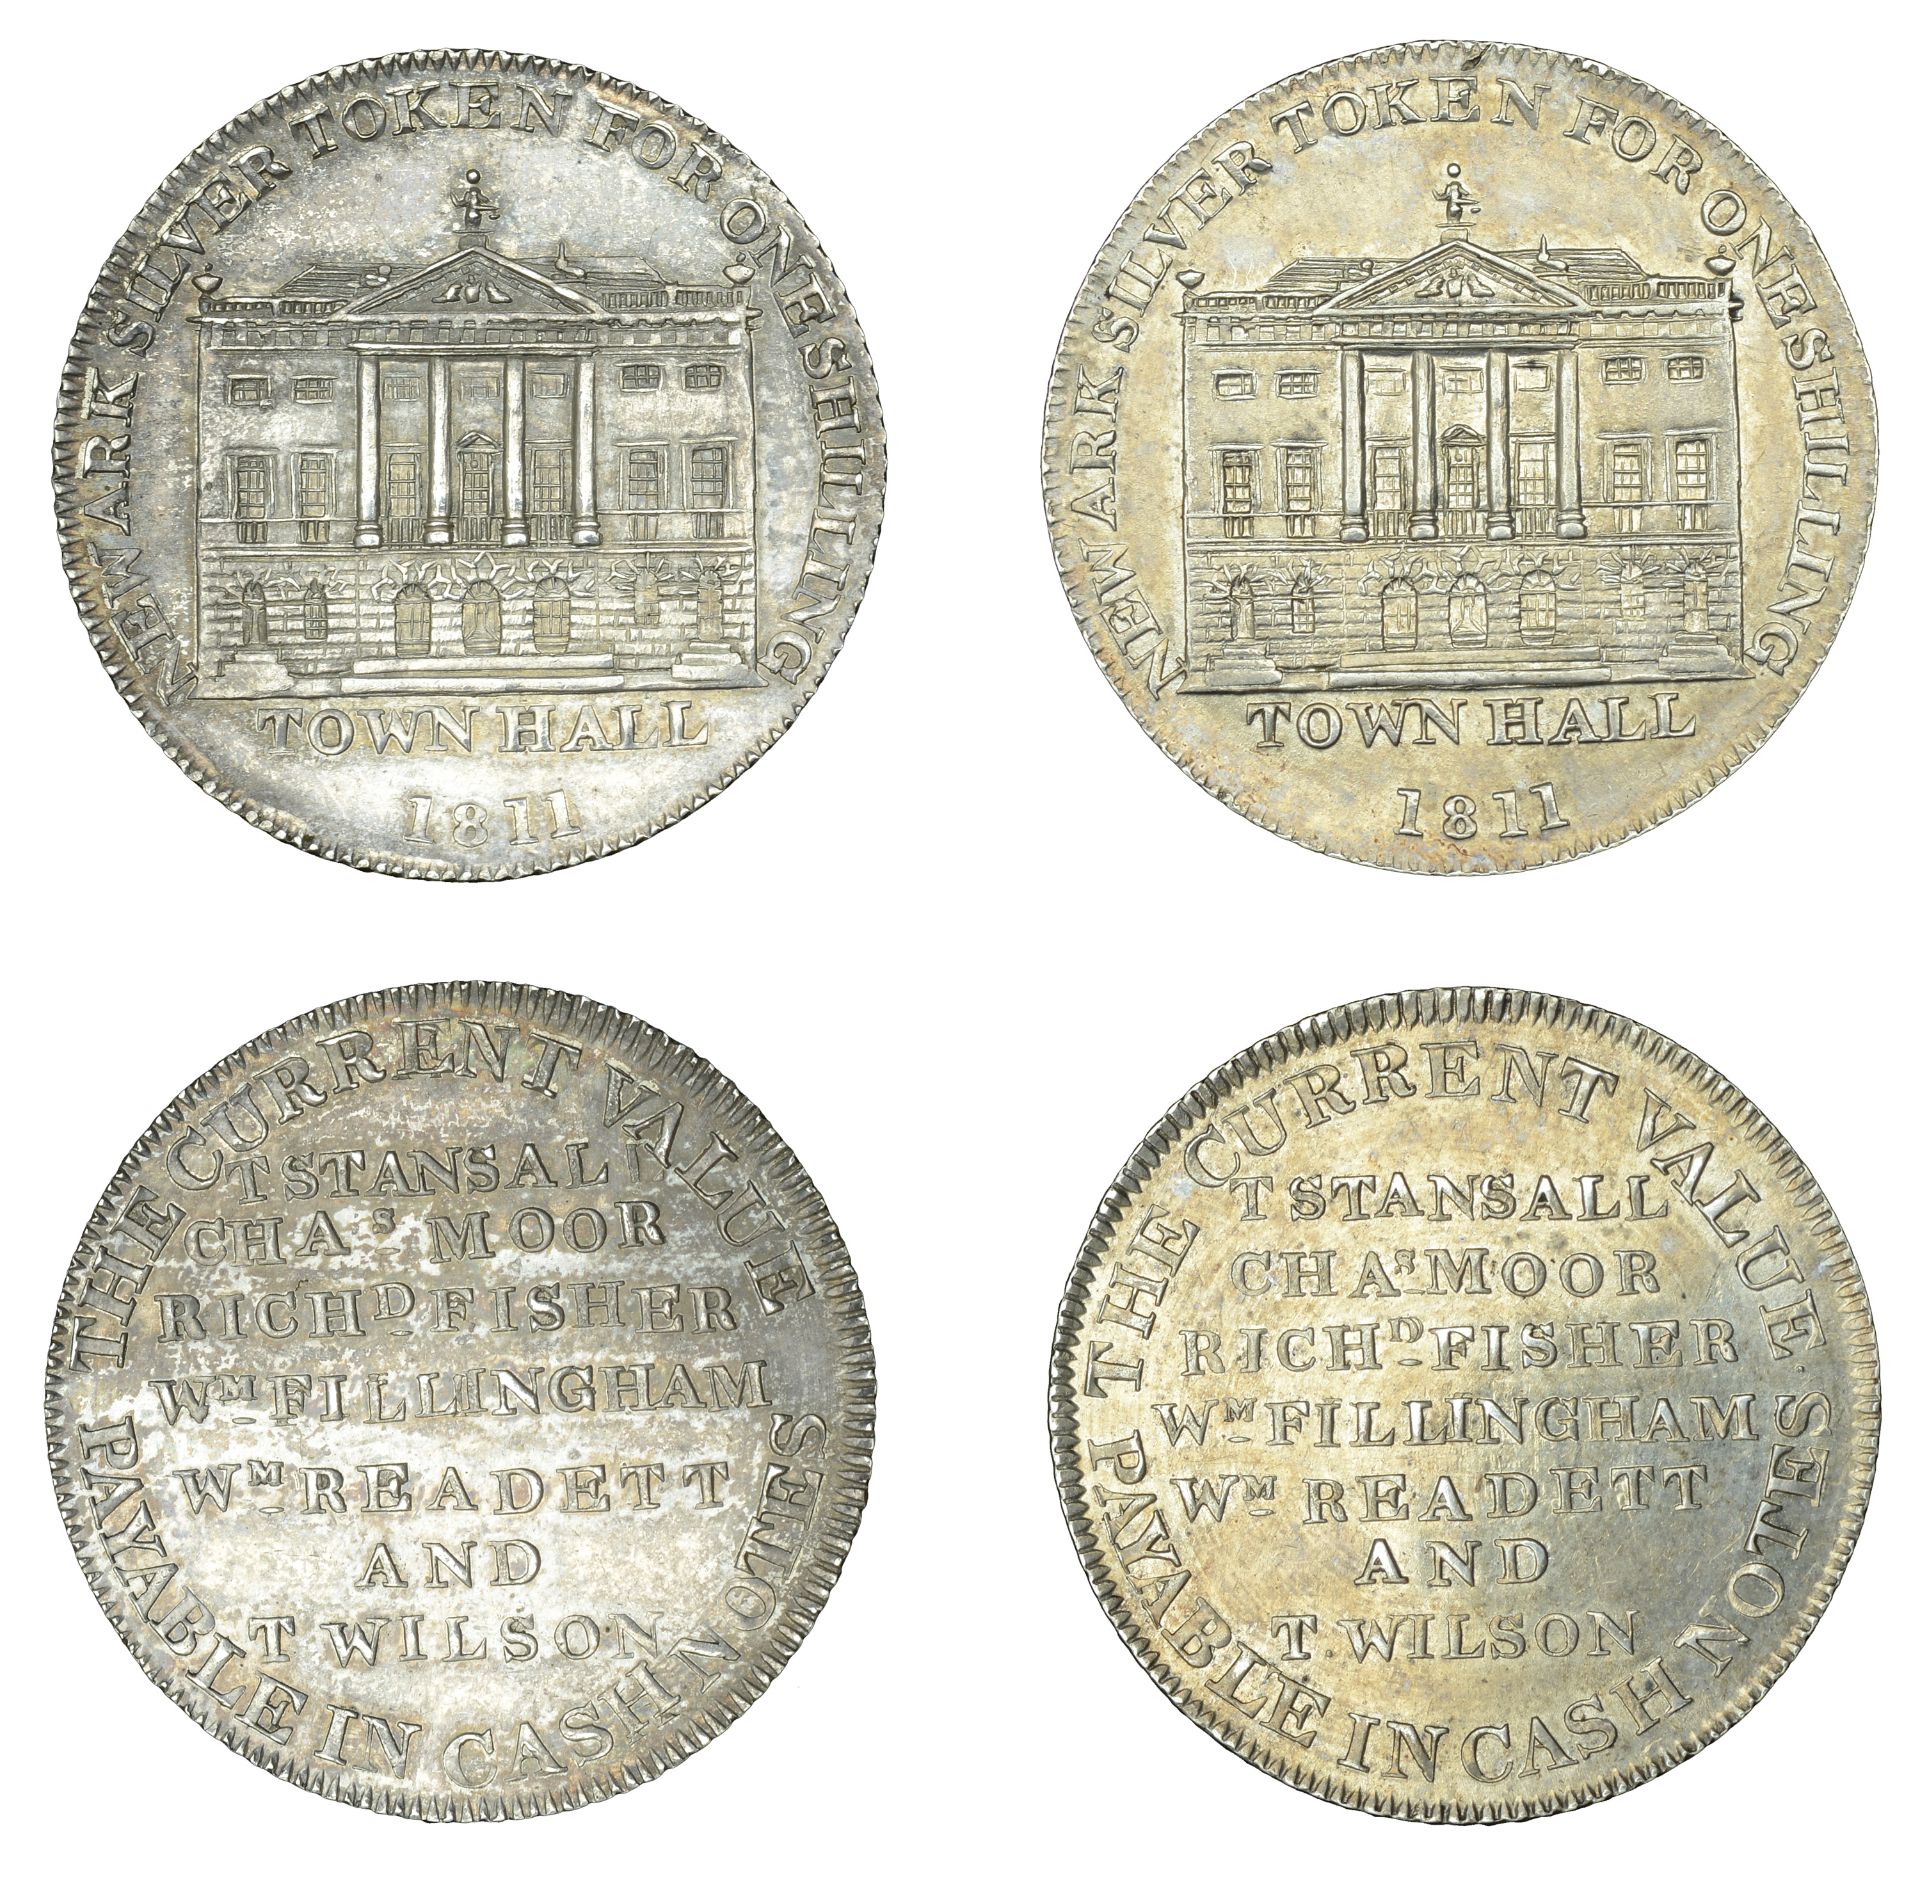 The Collection of 19th Century Tokens formed by John Akins (Part II)